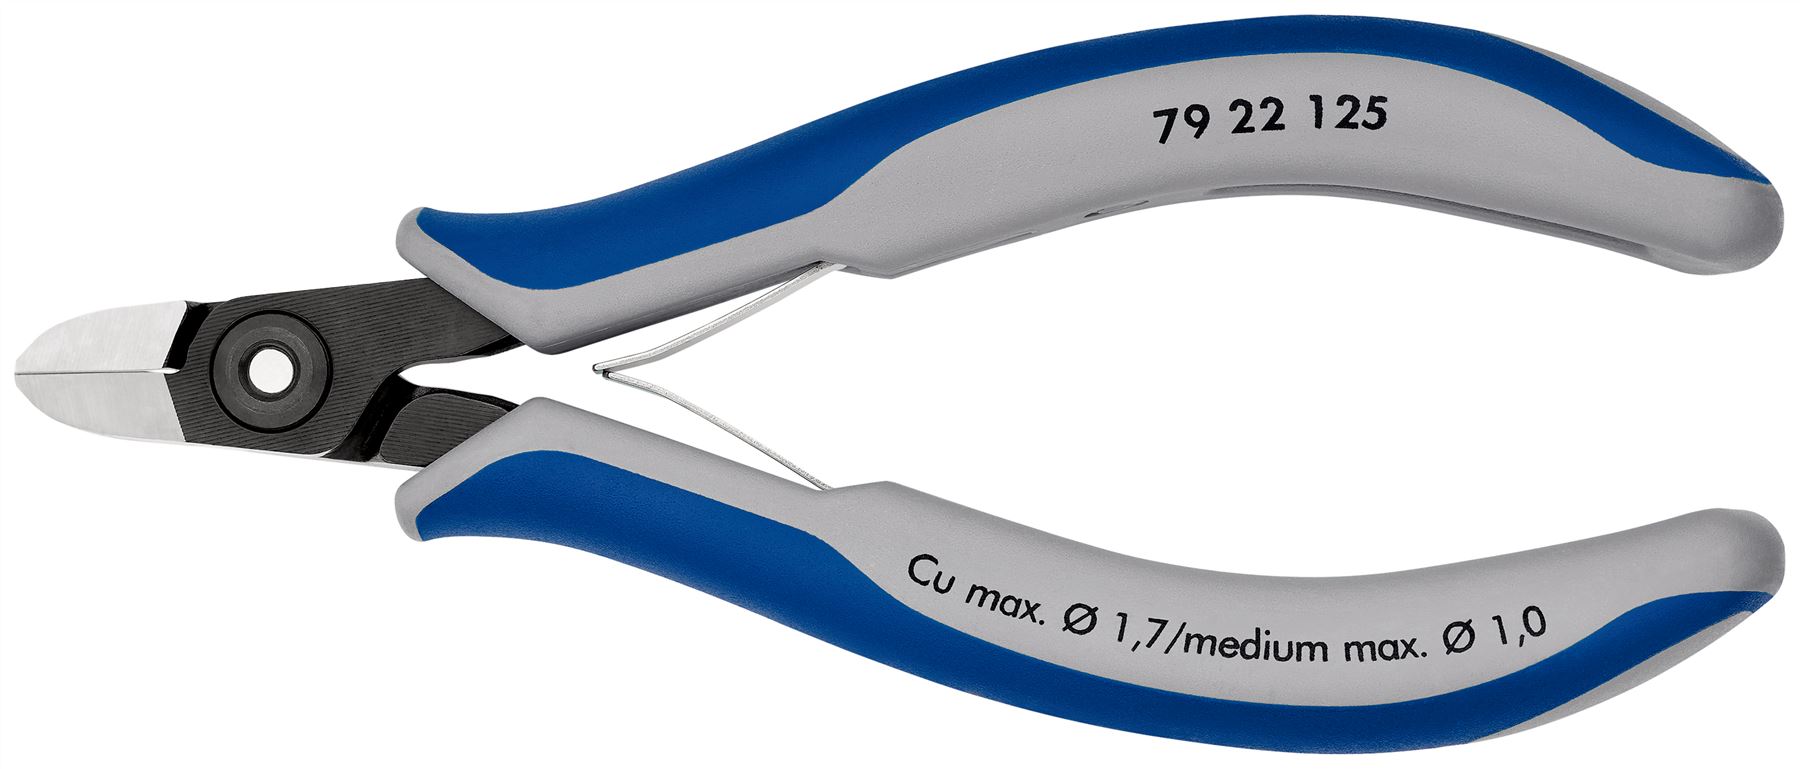 KNIPEX Precision Electronics Diagonal Cutter Cutting Pliers 125mm Multi Component Grips 79 22 125